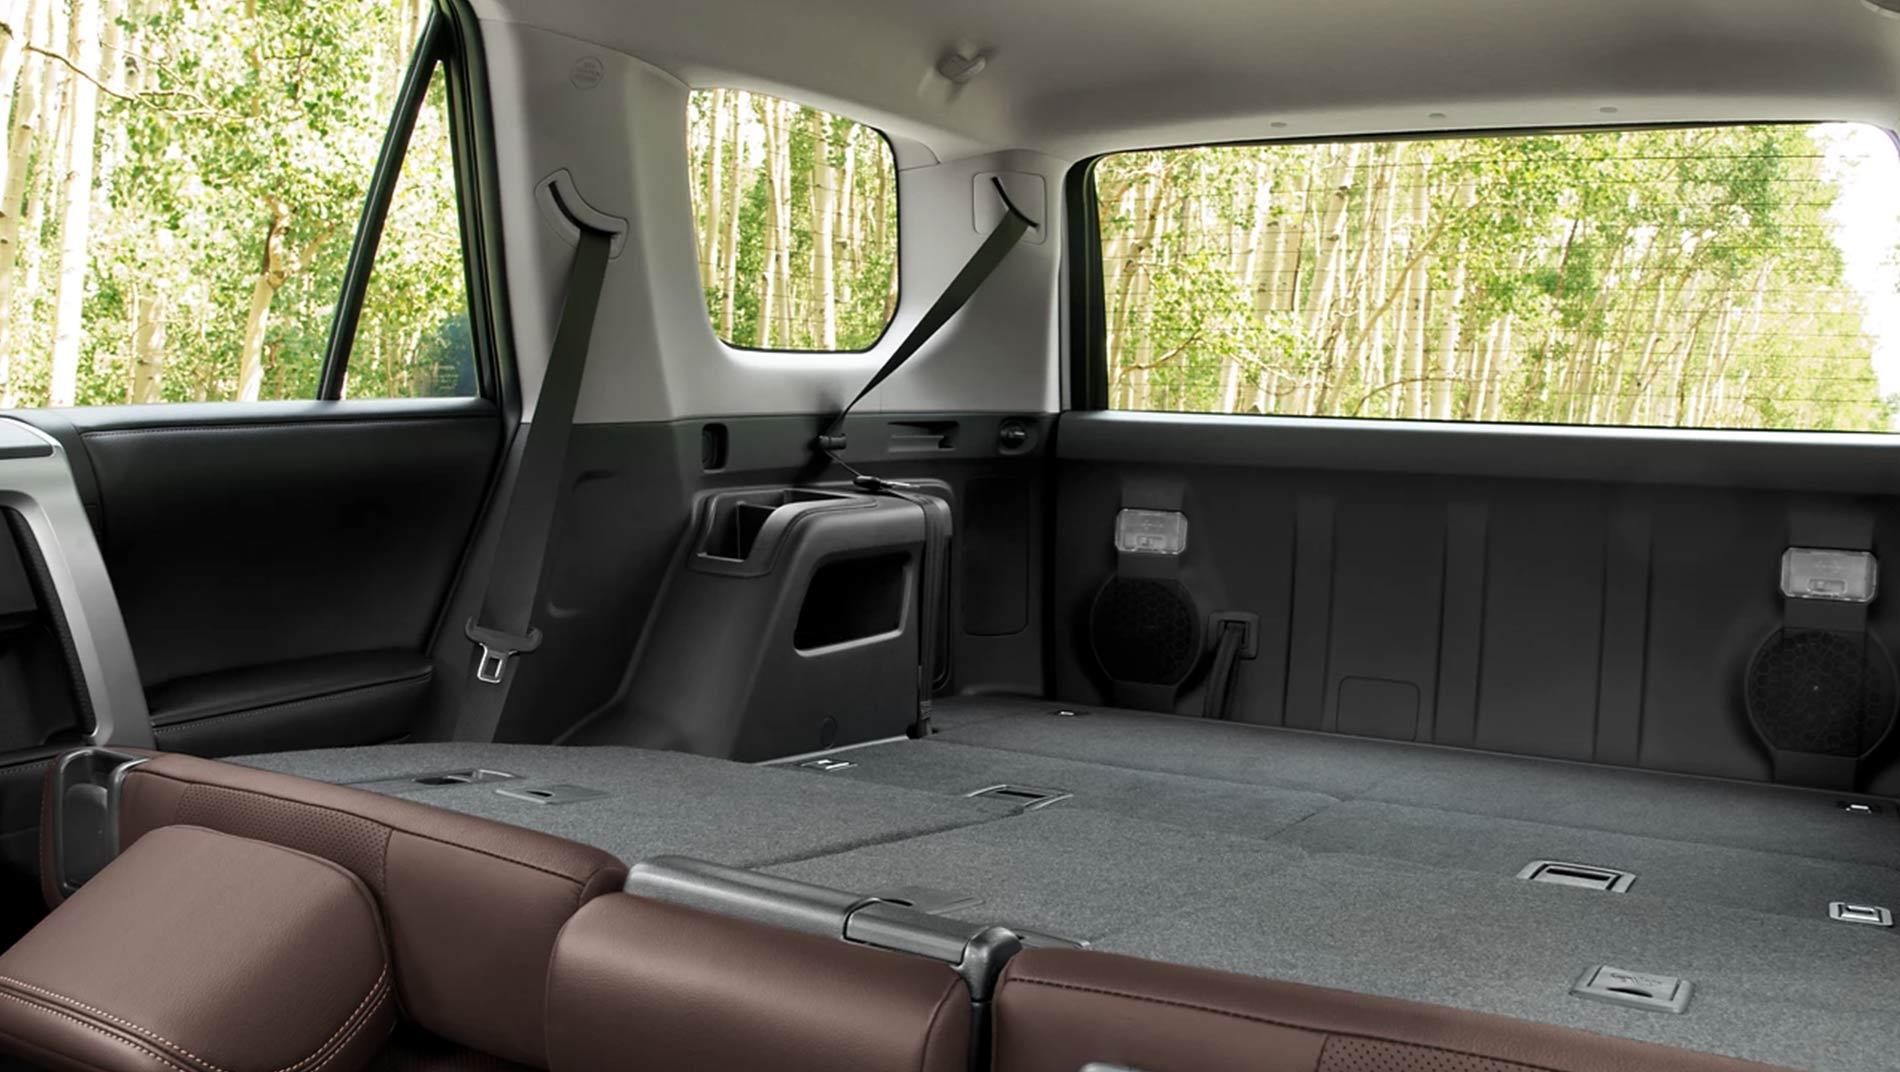 Interior back seating of a Toyota 4Runner with leather fold flat seats